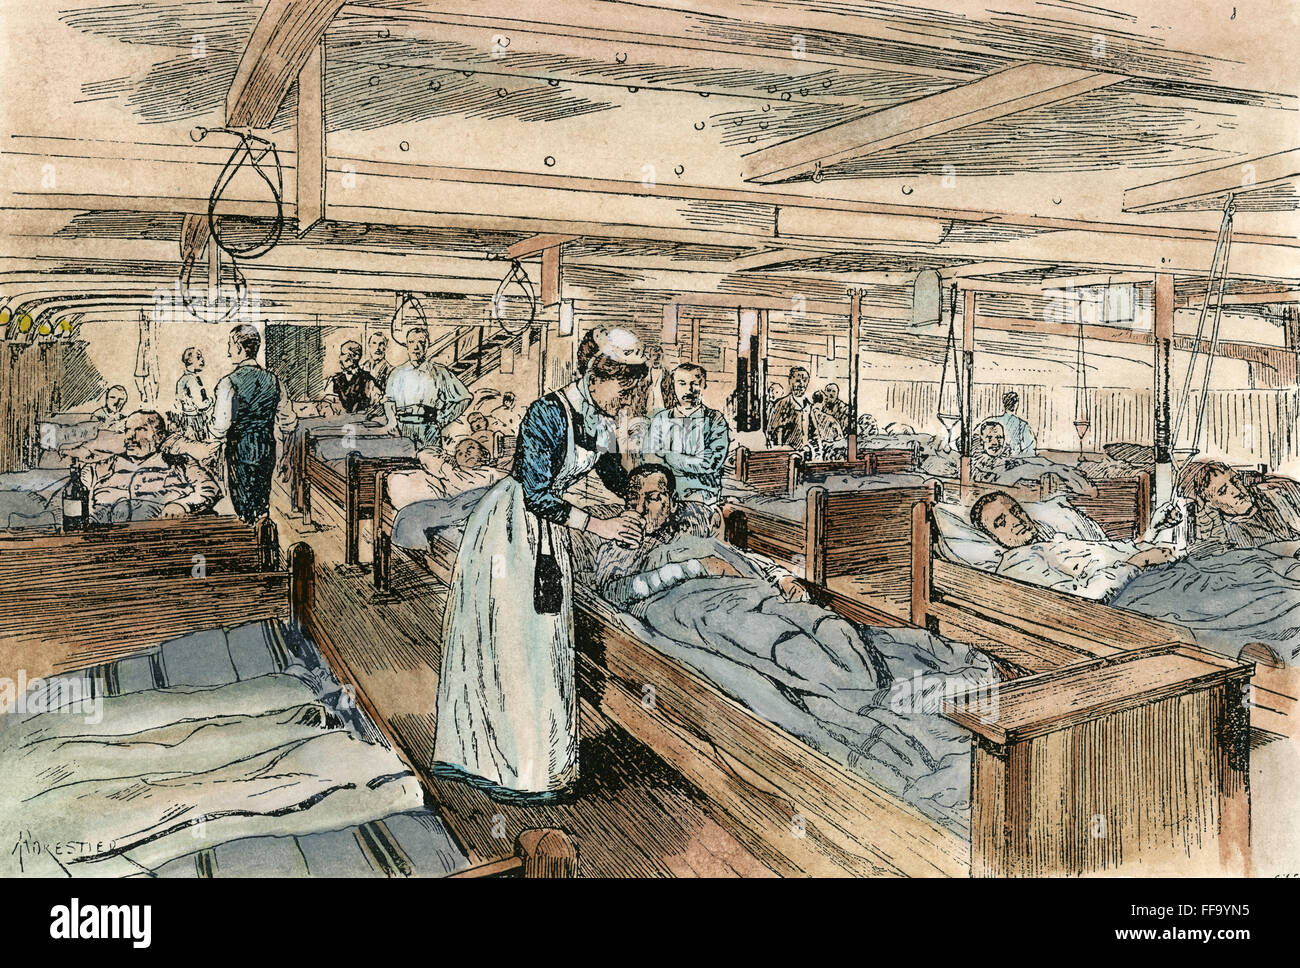 BOER WAR: HOSPITAL SHIP. /nWounded British soldiers onboard a hospital-ship returning to England from South Africa during the Boer War. Line engraving, English, 1900. Stock Photo